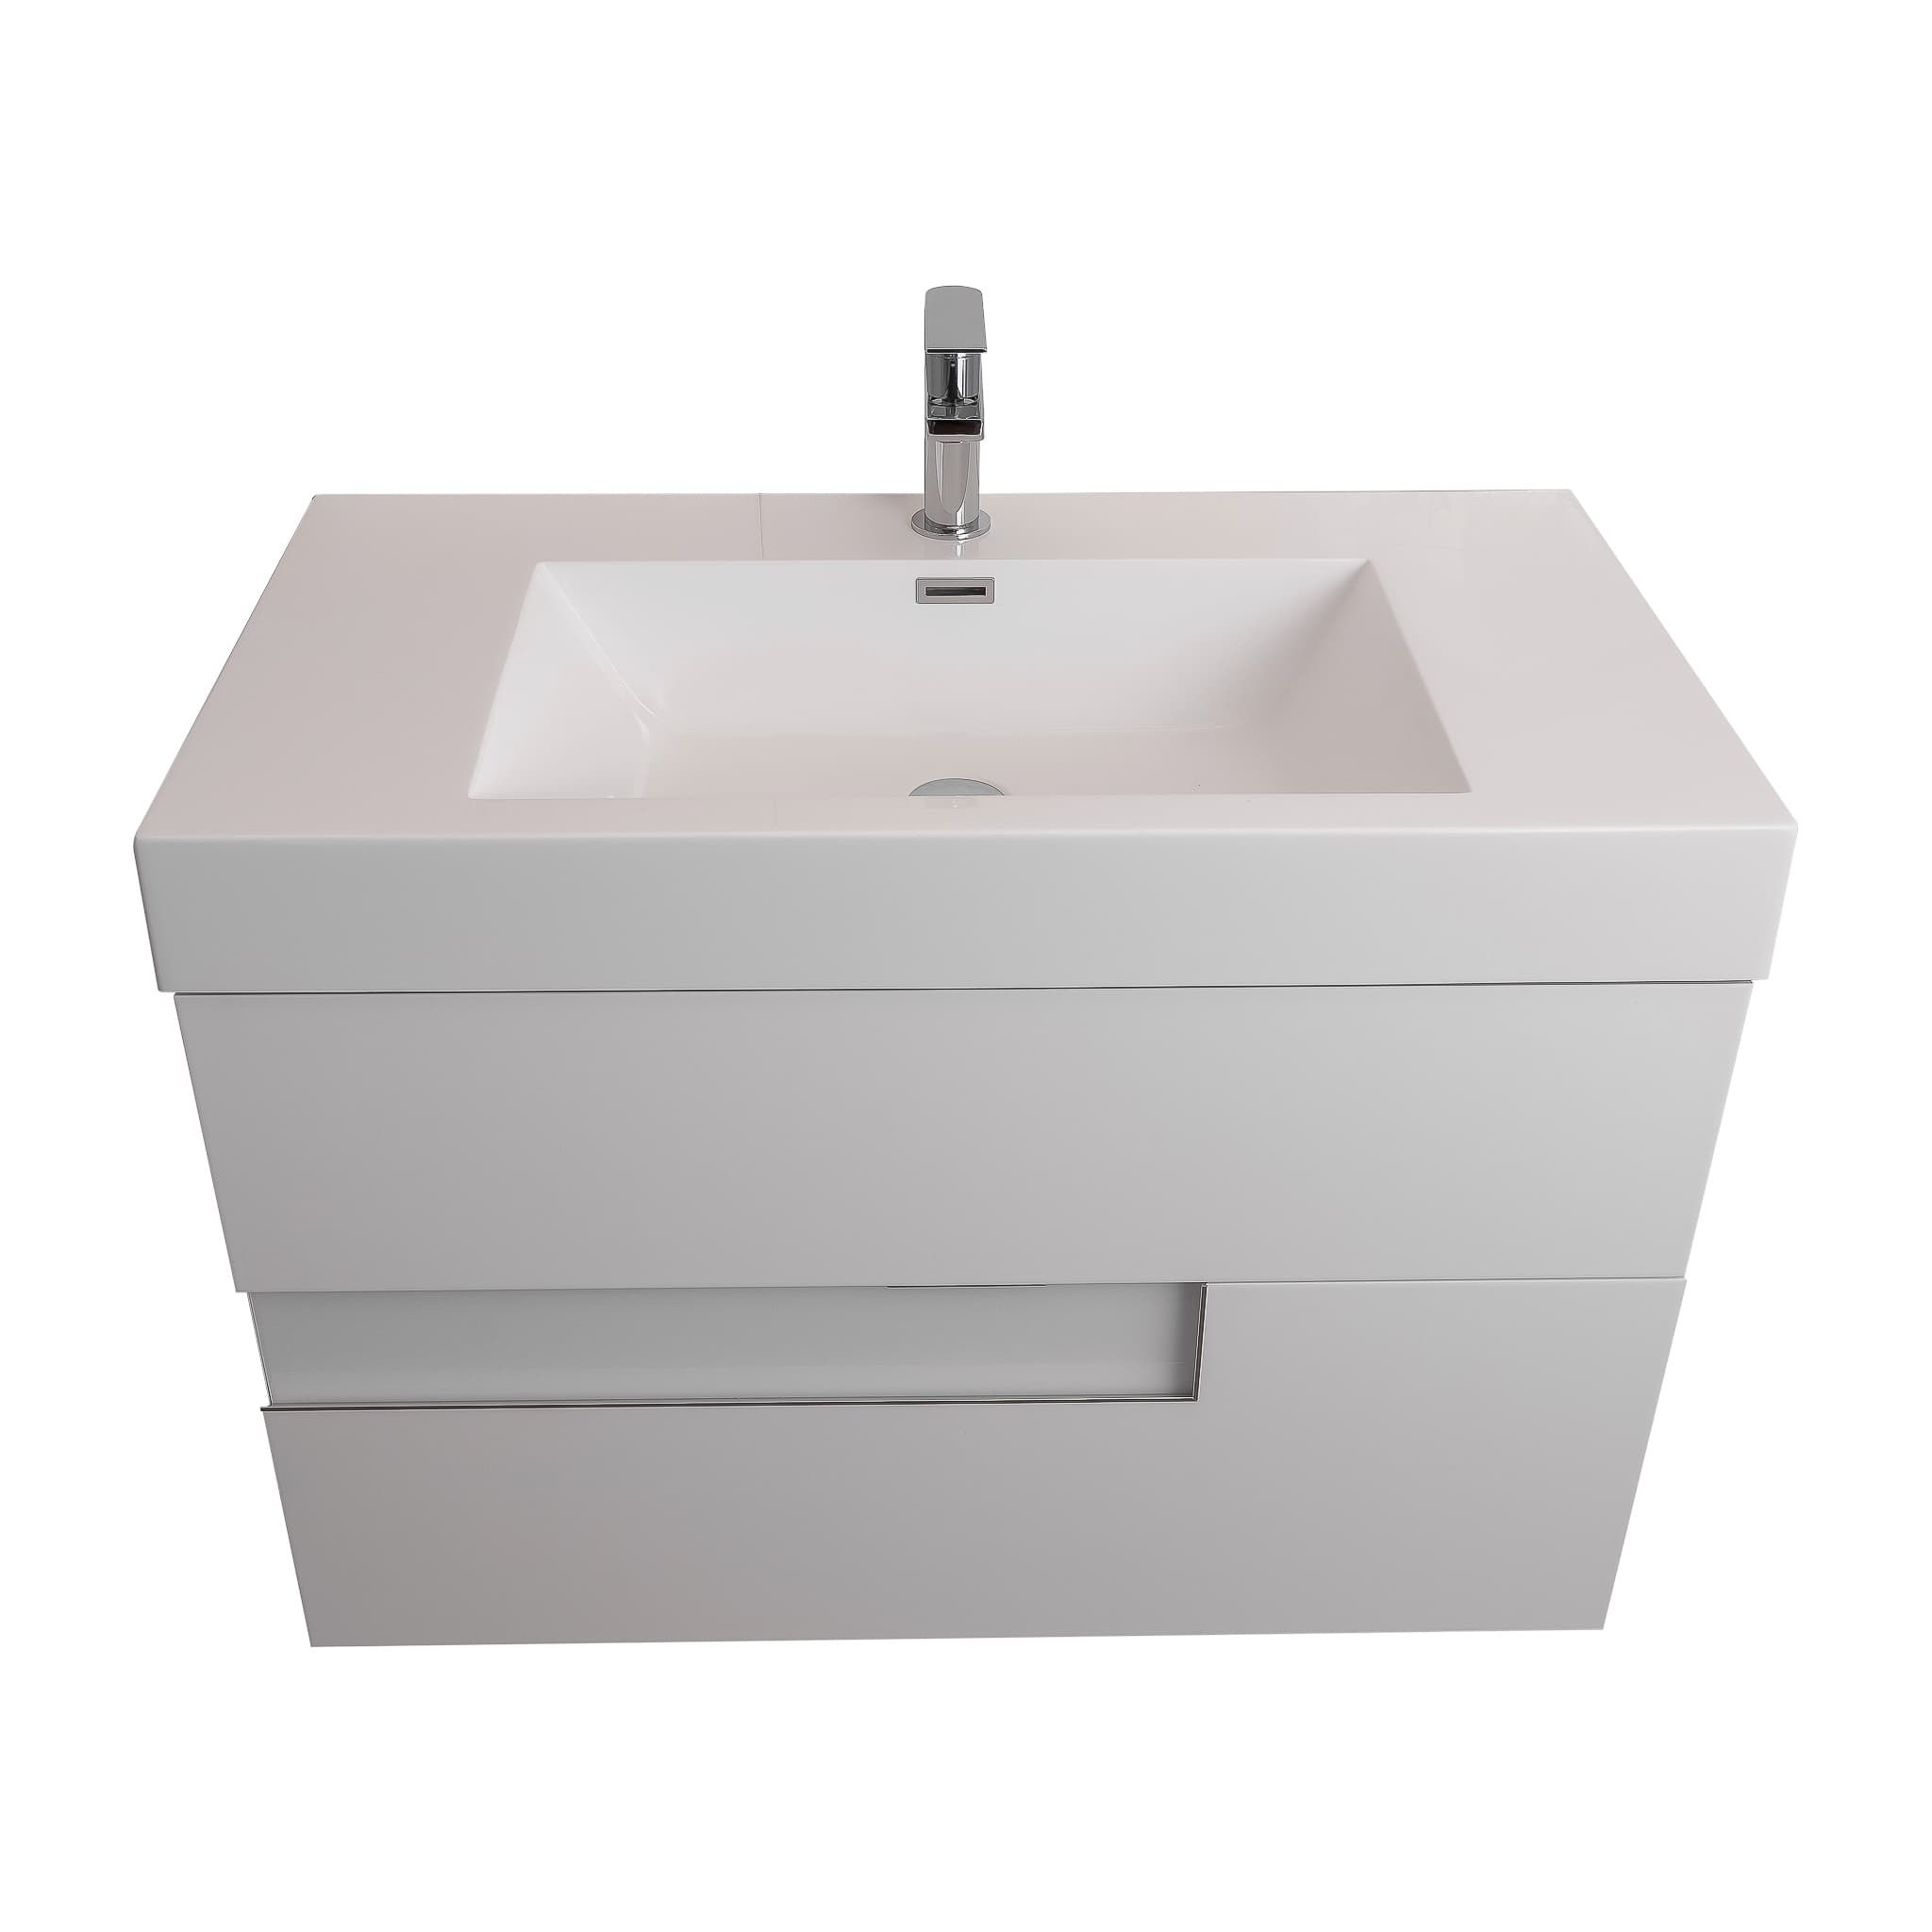 Vision 39.5 White High Gloss Cabinet, Square Cultured Marble Sink, Wall Mounted Modern Vanity Set